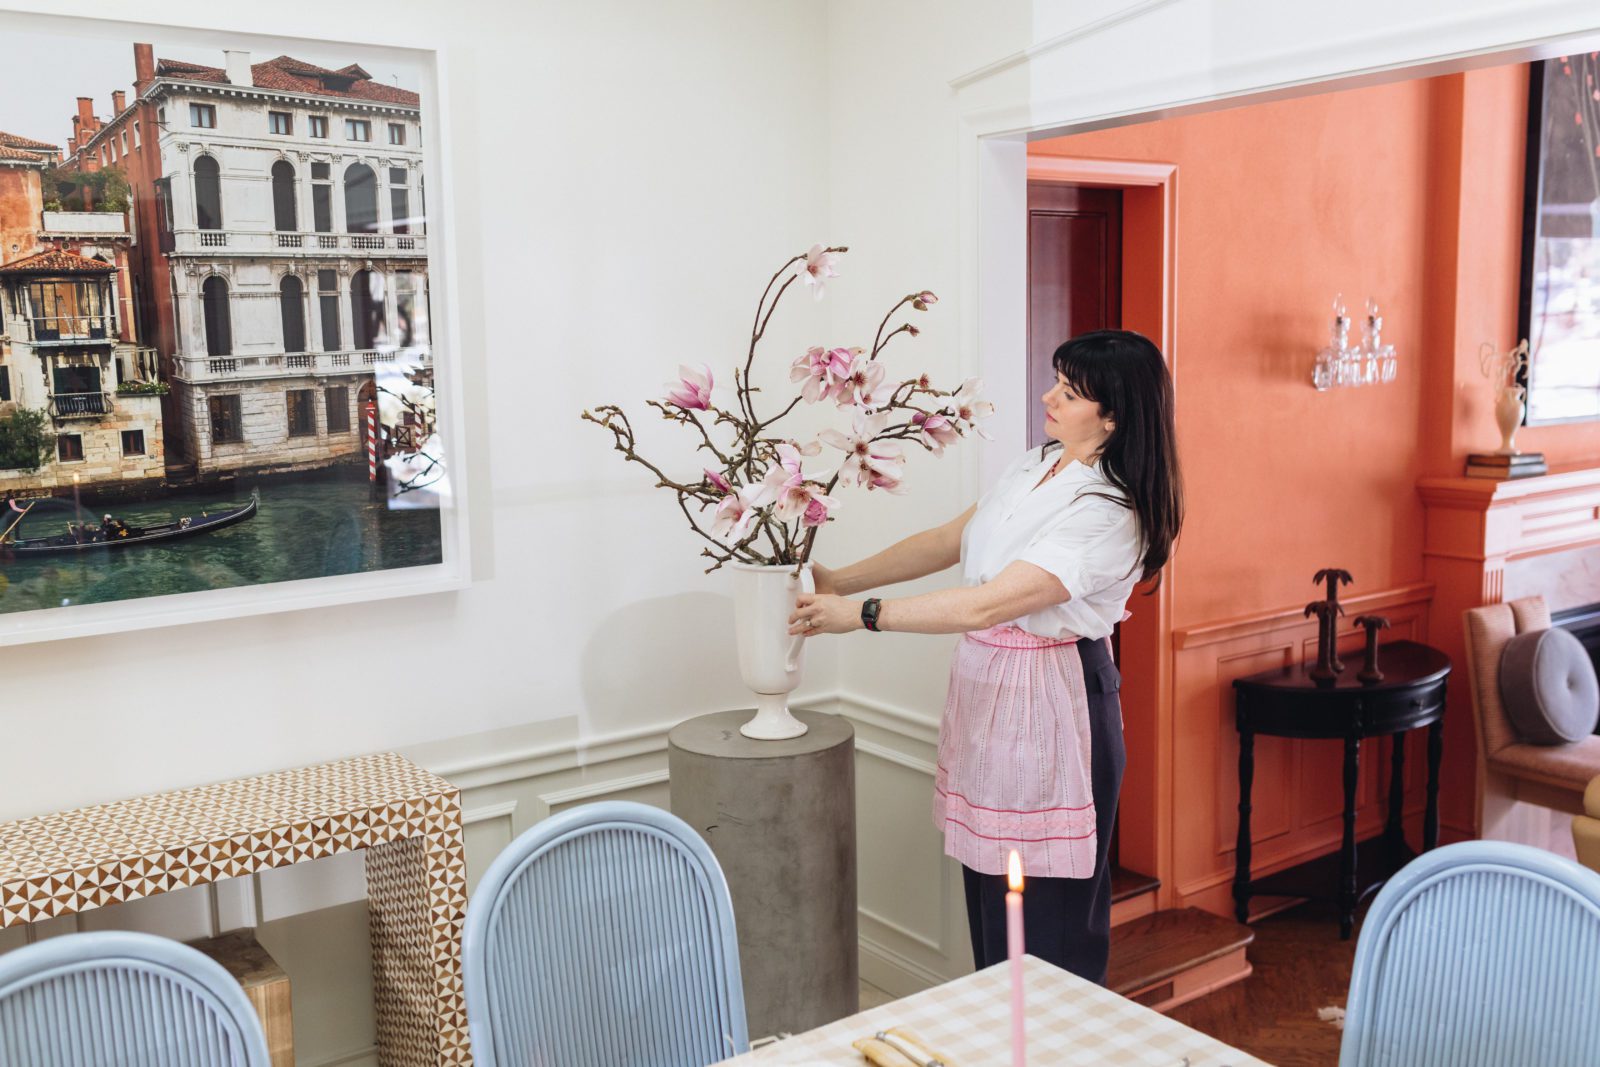 Woman arranging magnolia branches in a vase in a bright and airy dining room.